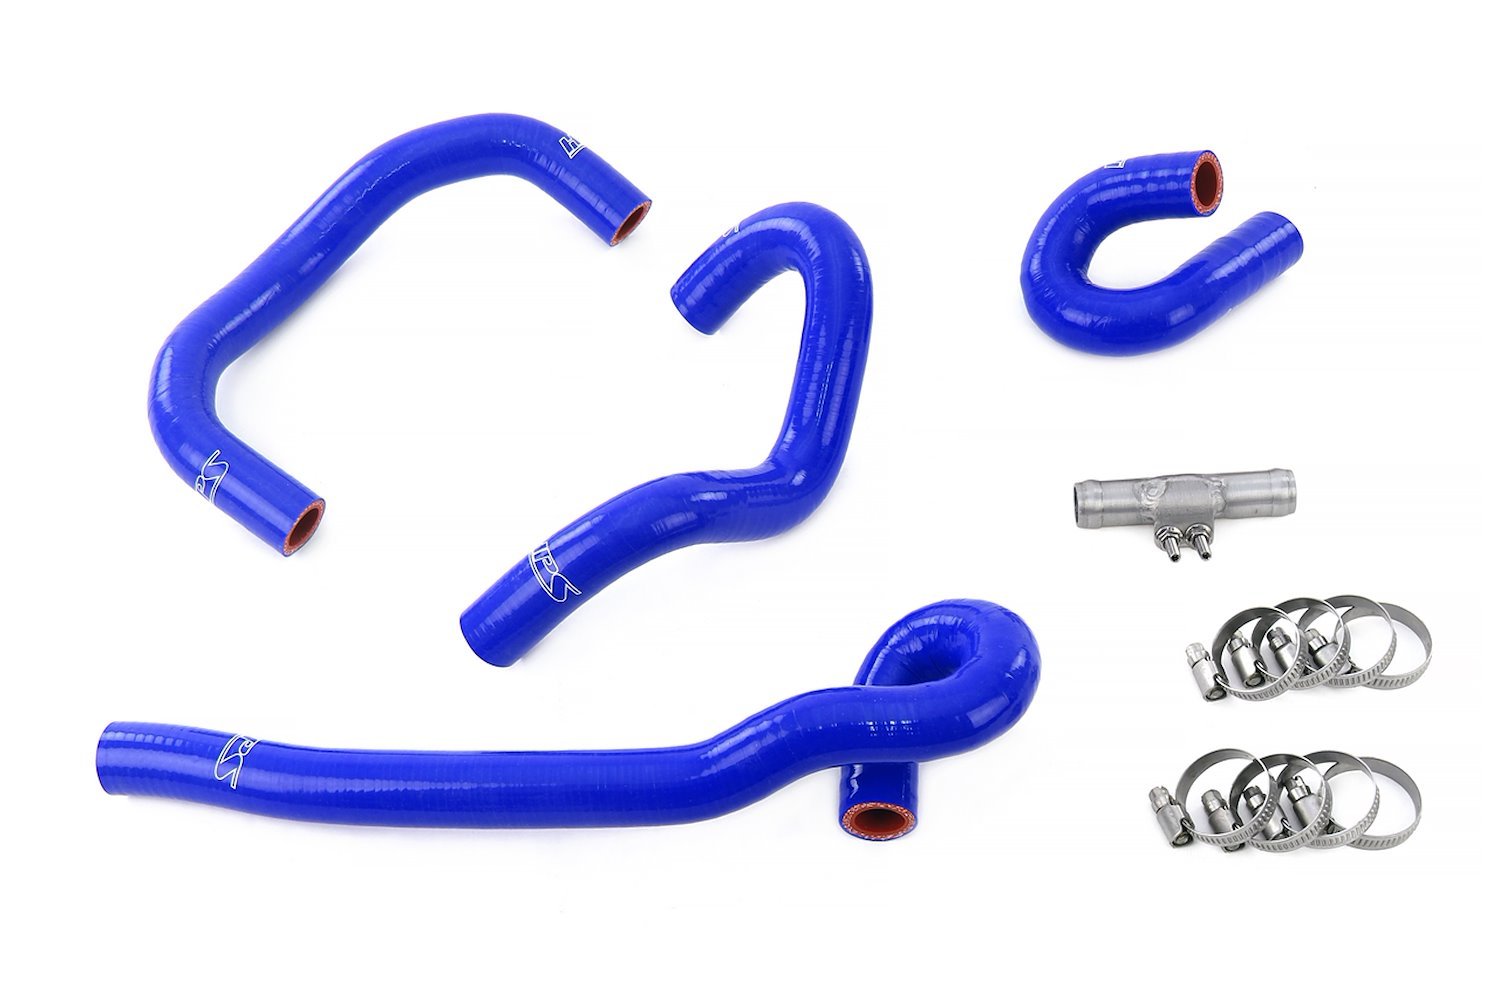 57-2093-BLUE Heater Hose Kit, 3-Ply Reinforced Silicone, Replaces Rubber Heater Hoses